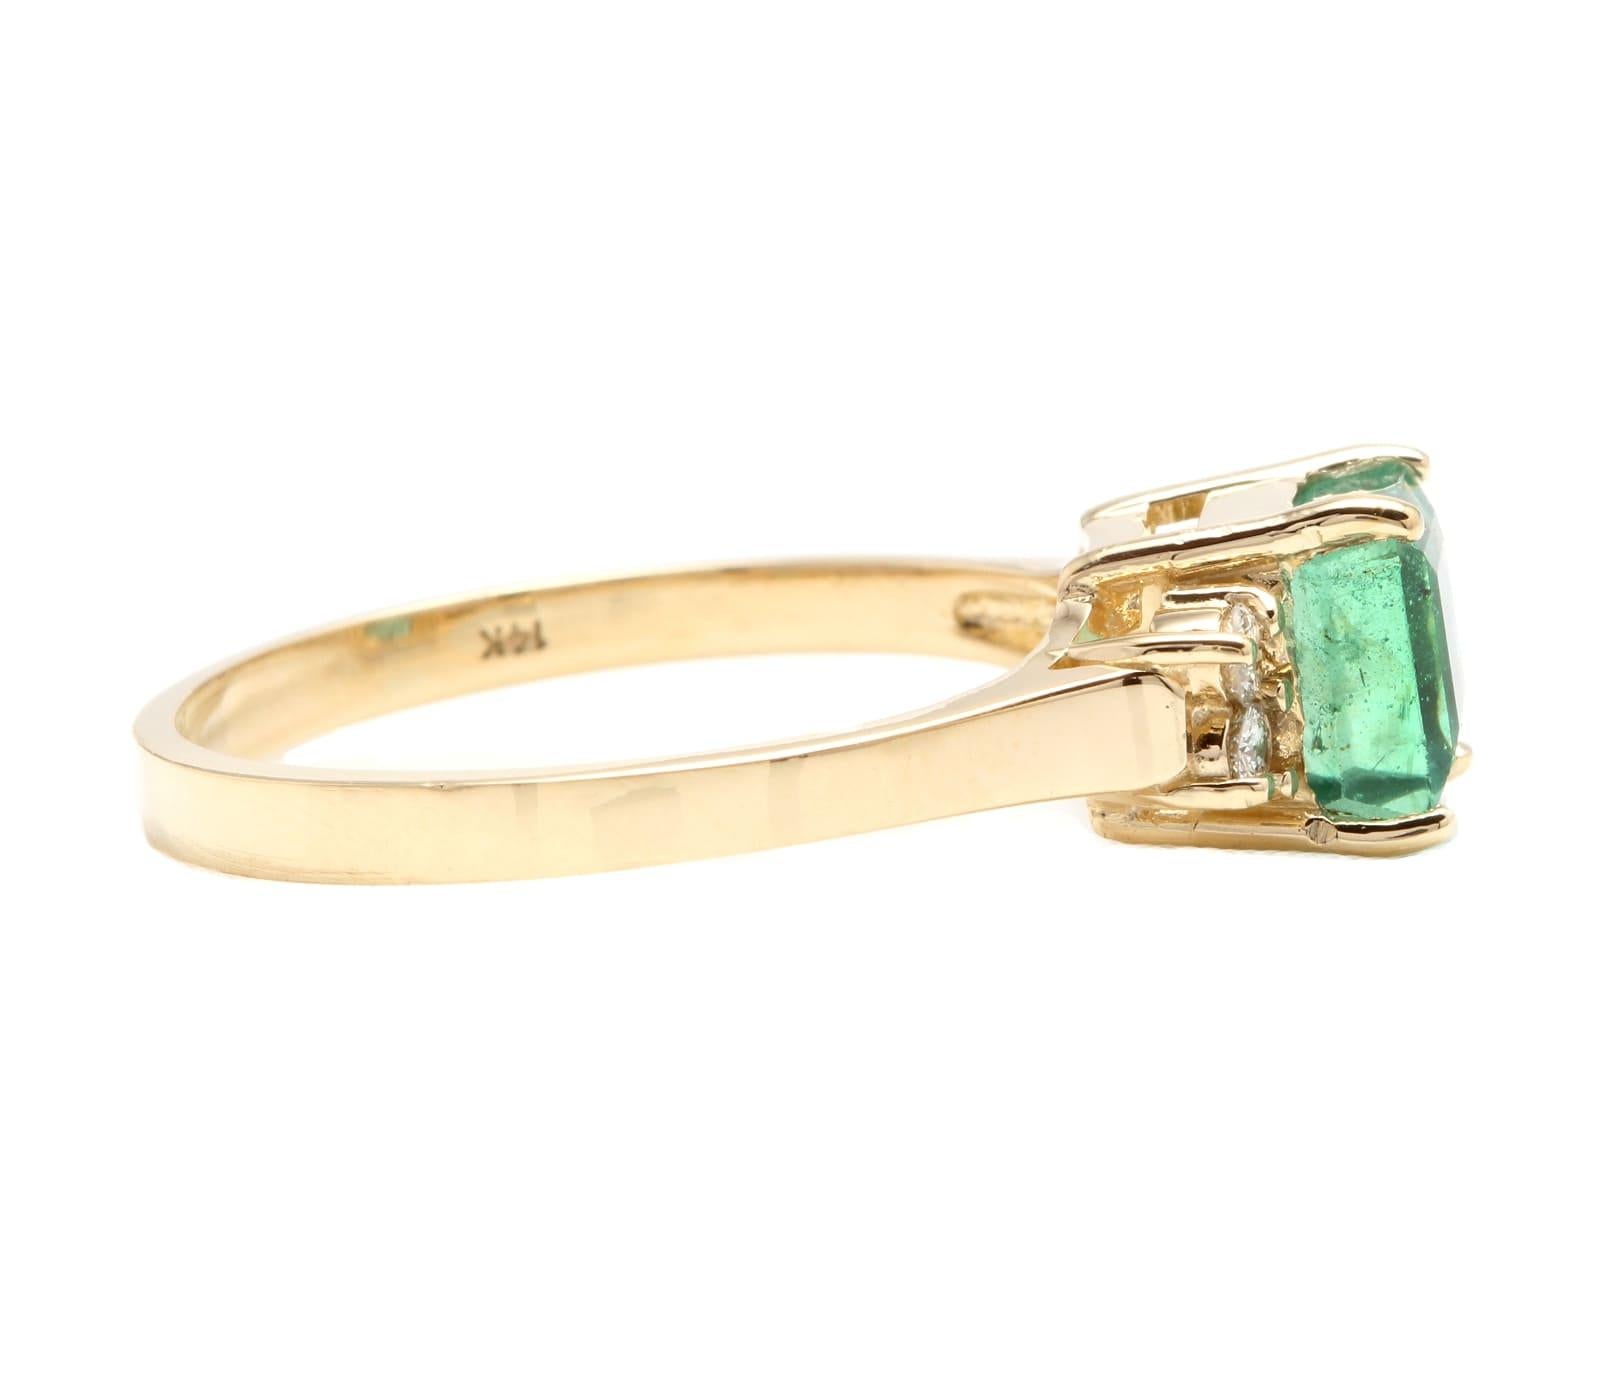 Emerald Cut 2.15 Carat Natural Emerald and Diamond 14 Karat Solid Yellow Gold Ring For Sale